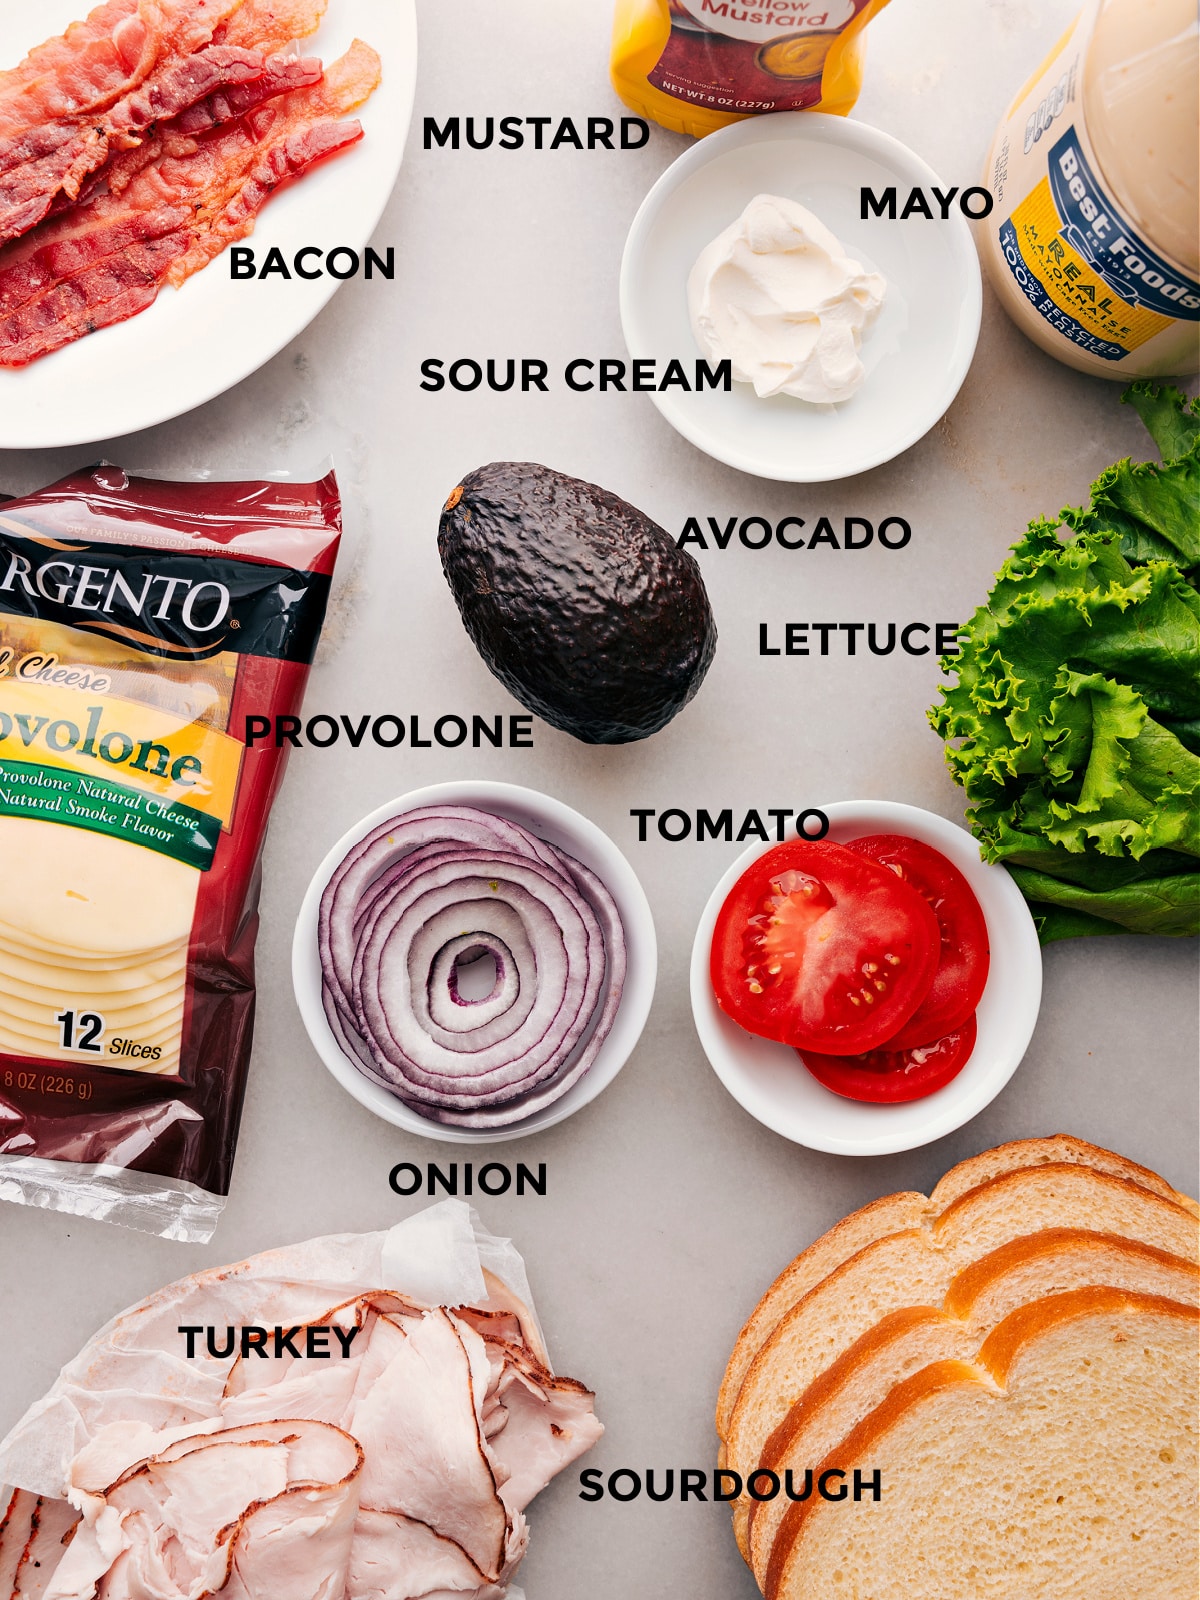 Ingredients used in the recipe including cheese, vegetables, meat, bacon, and mayo.